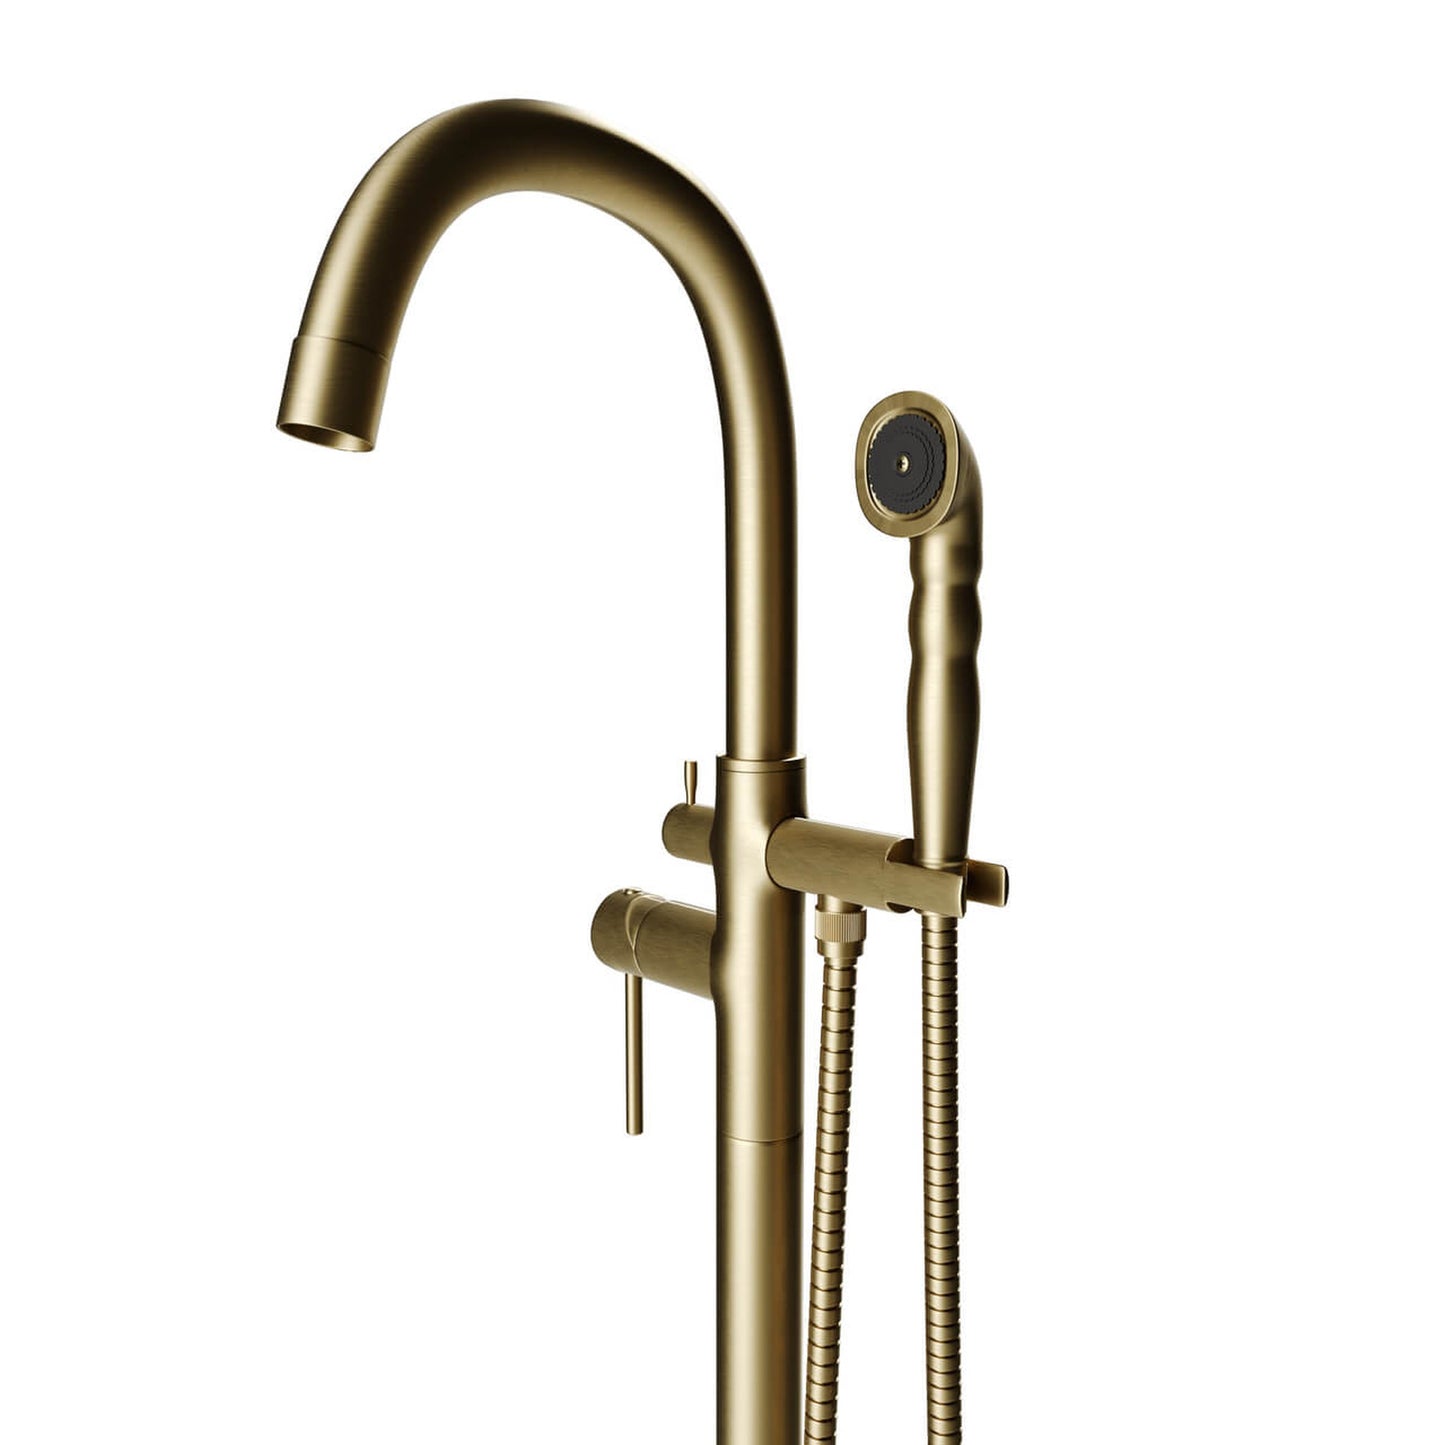 Castello USA Neptune Brushed Gold Float Freestanding Bathtub Filler With Shower Attachment